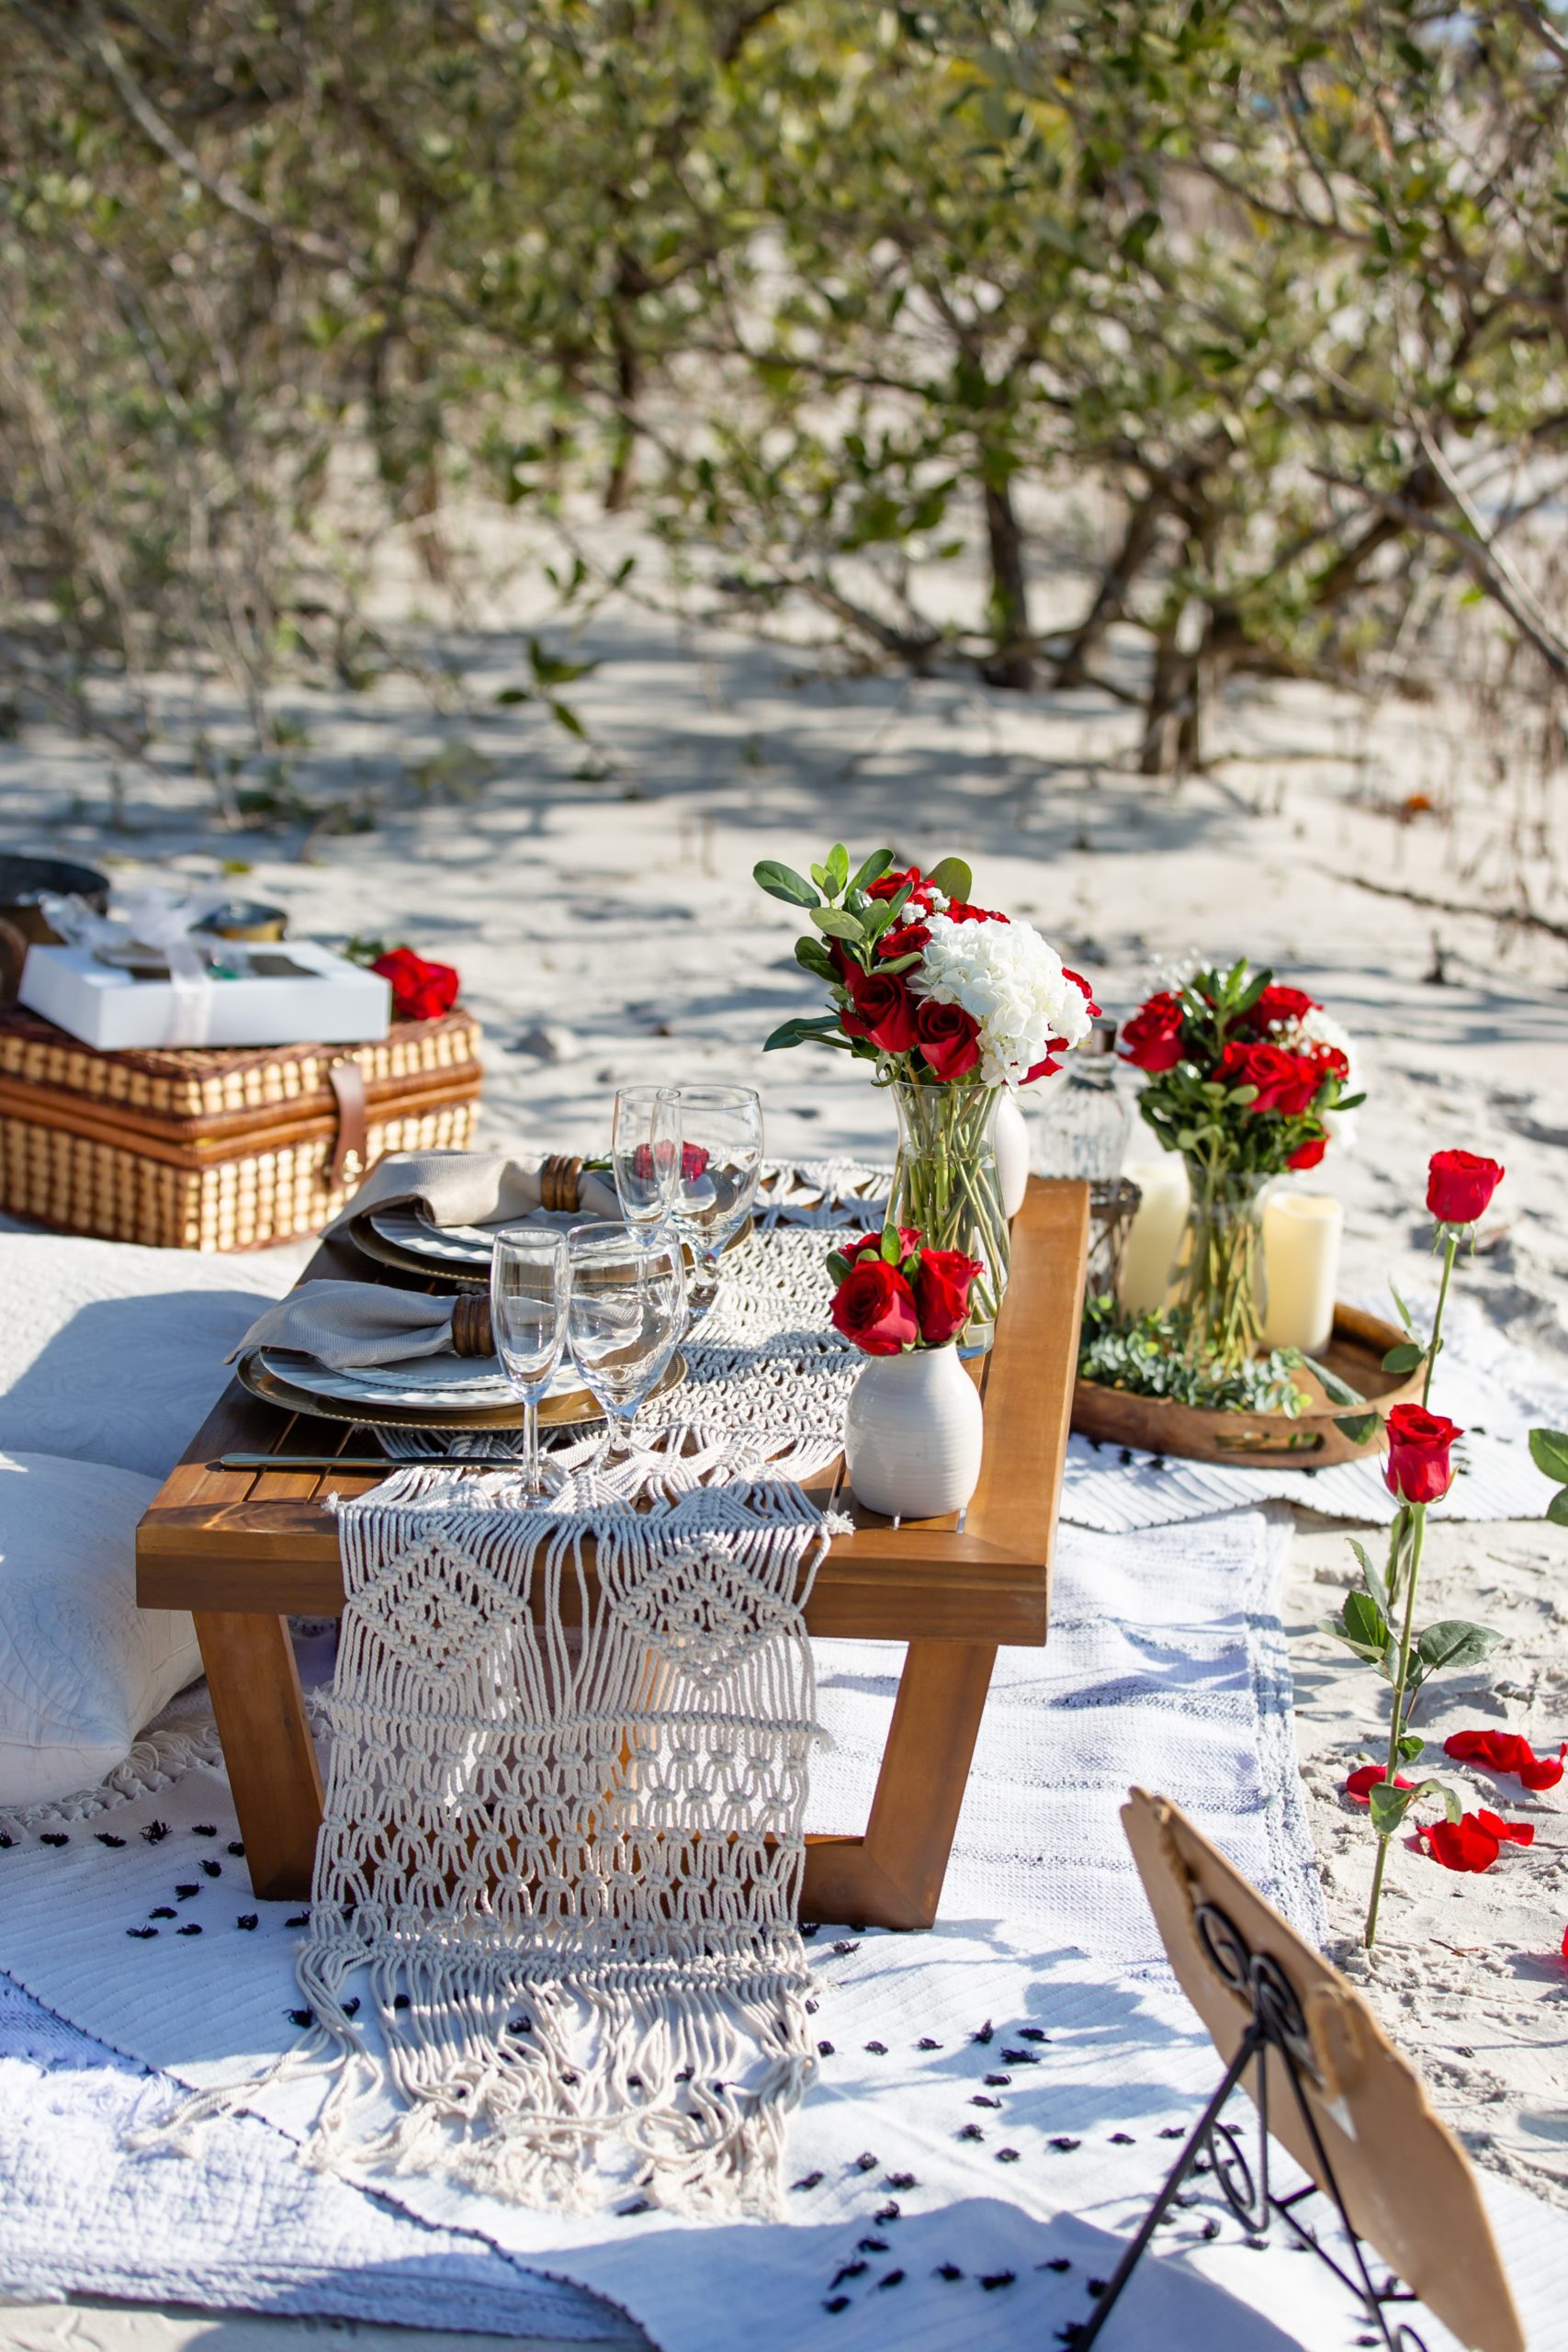 A picnic on the beach with roses, pillows and blankets